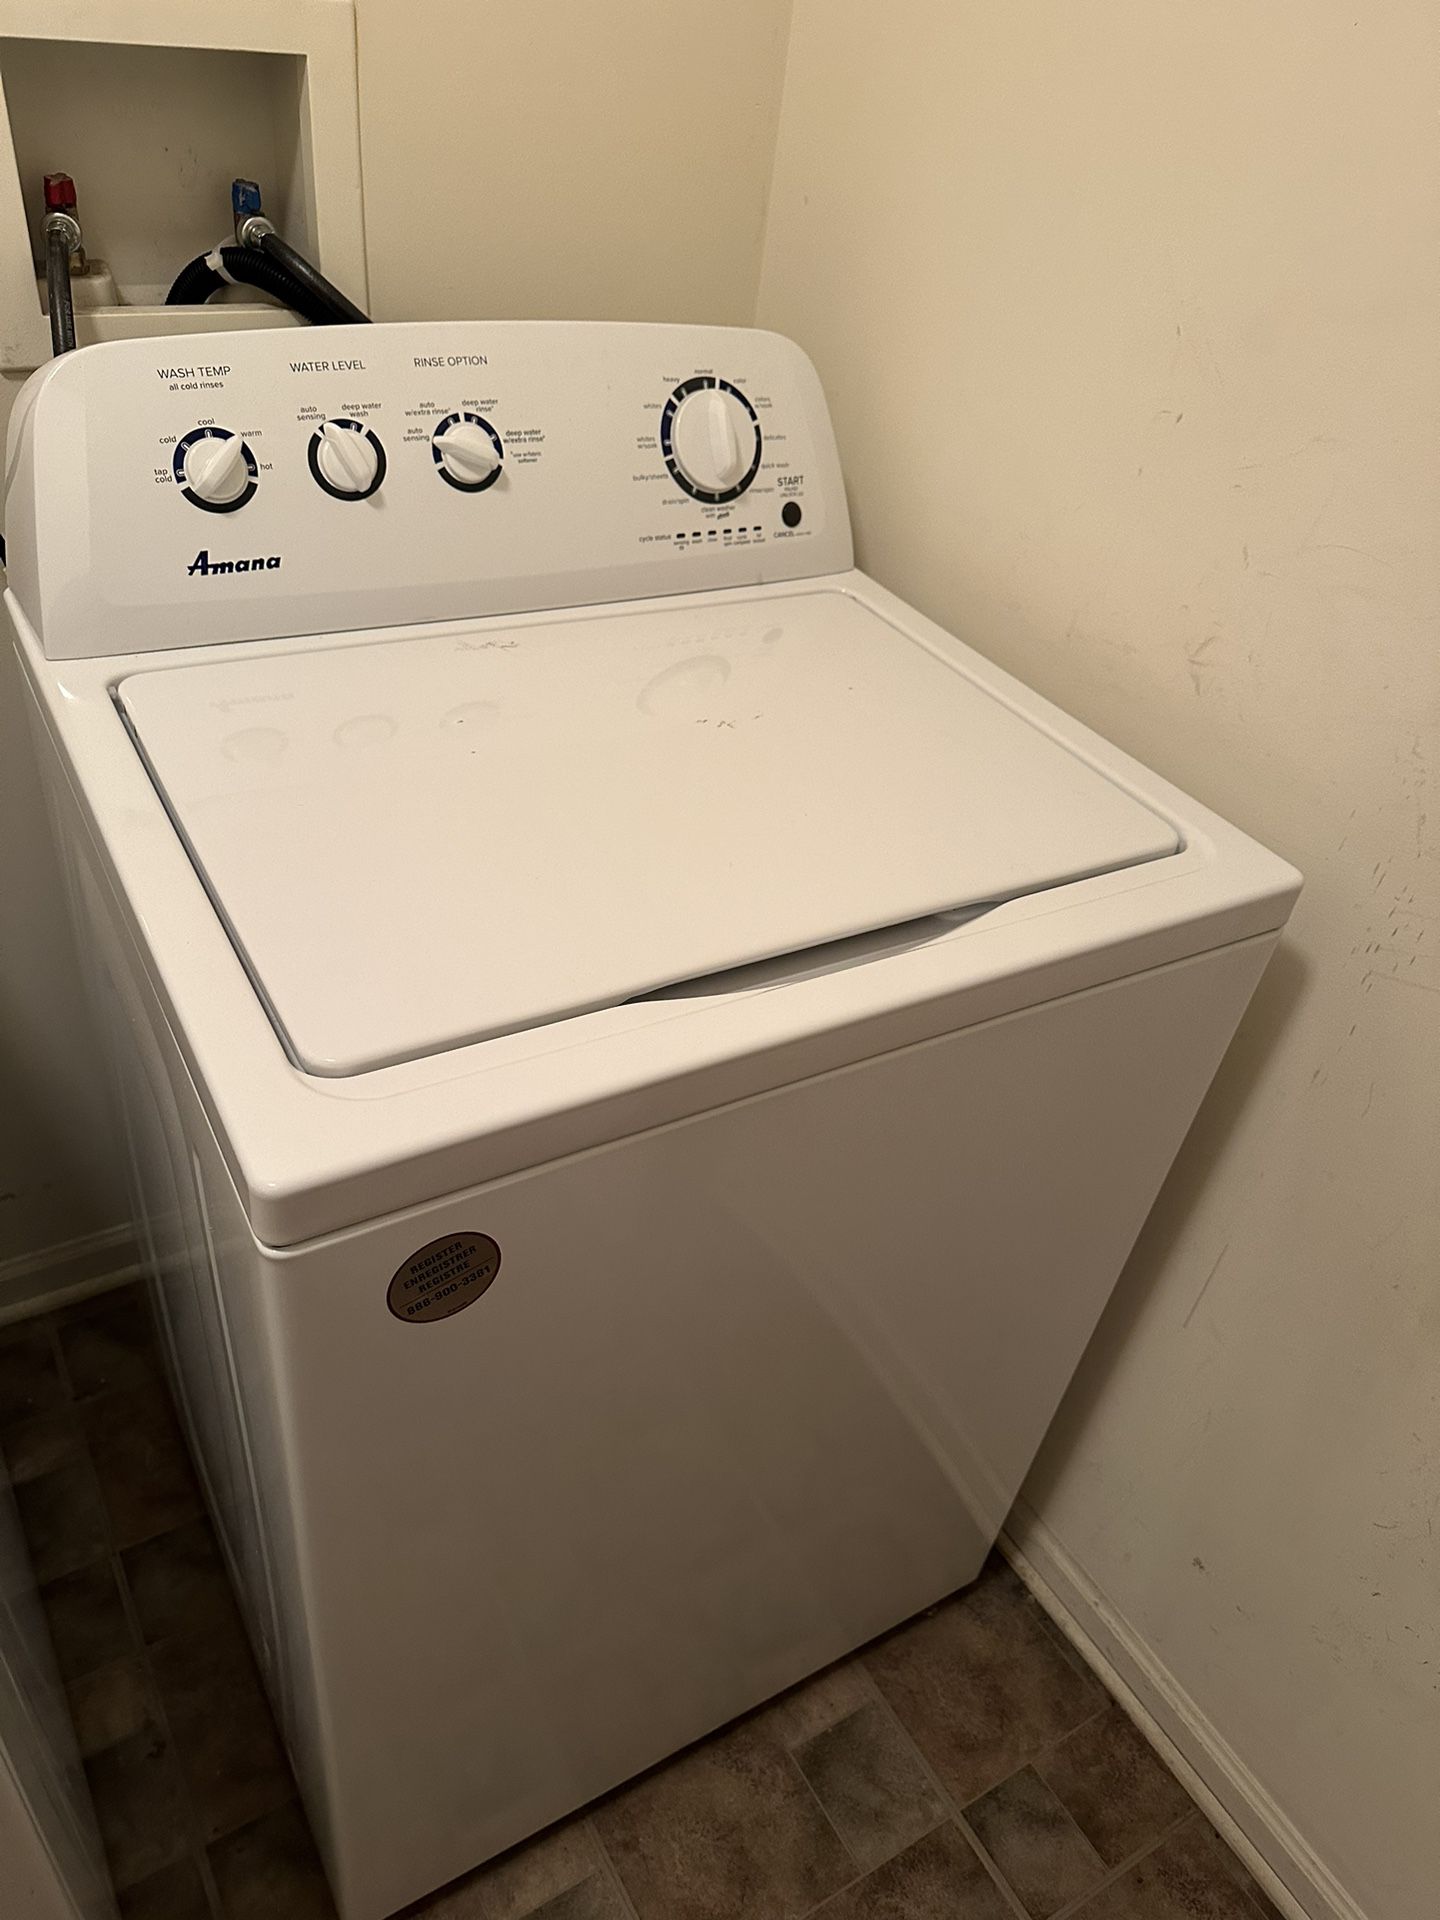 LIKE NEW Amana Washer For Sale $300